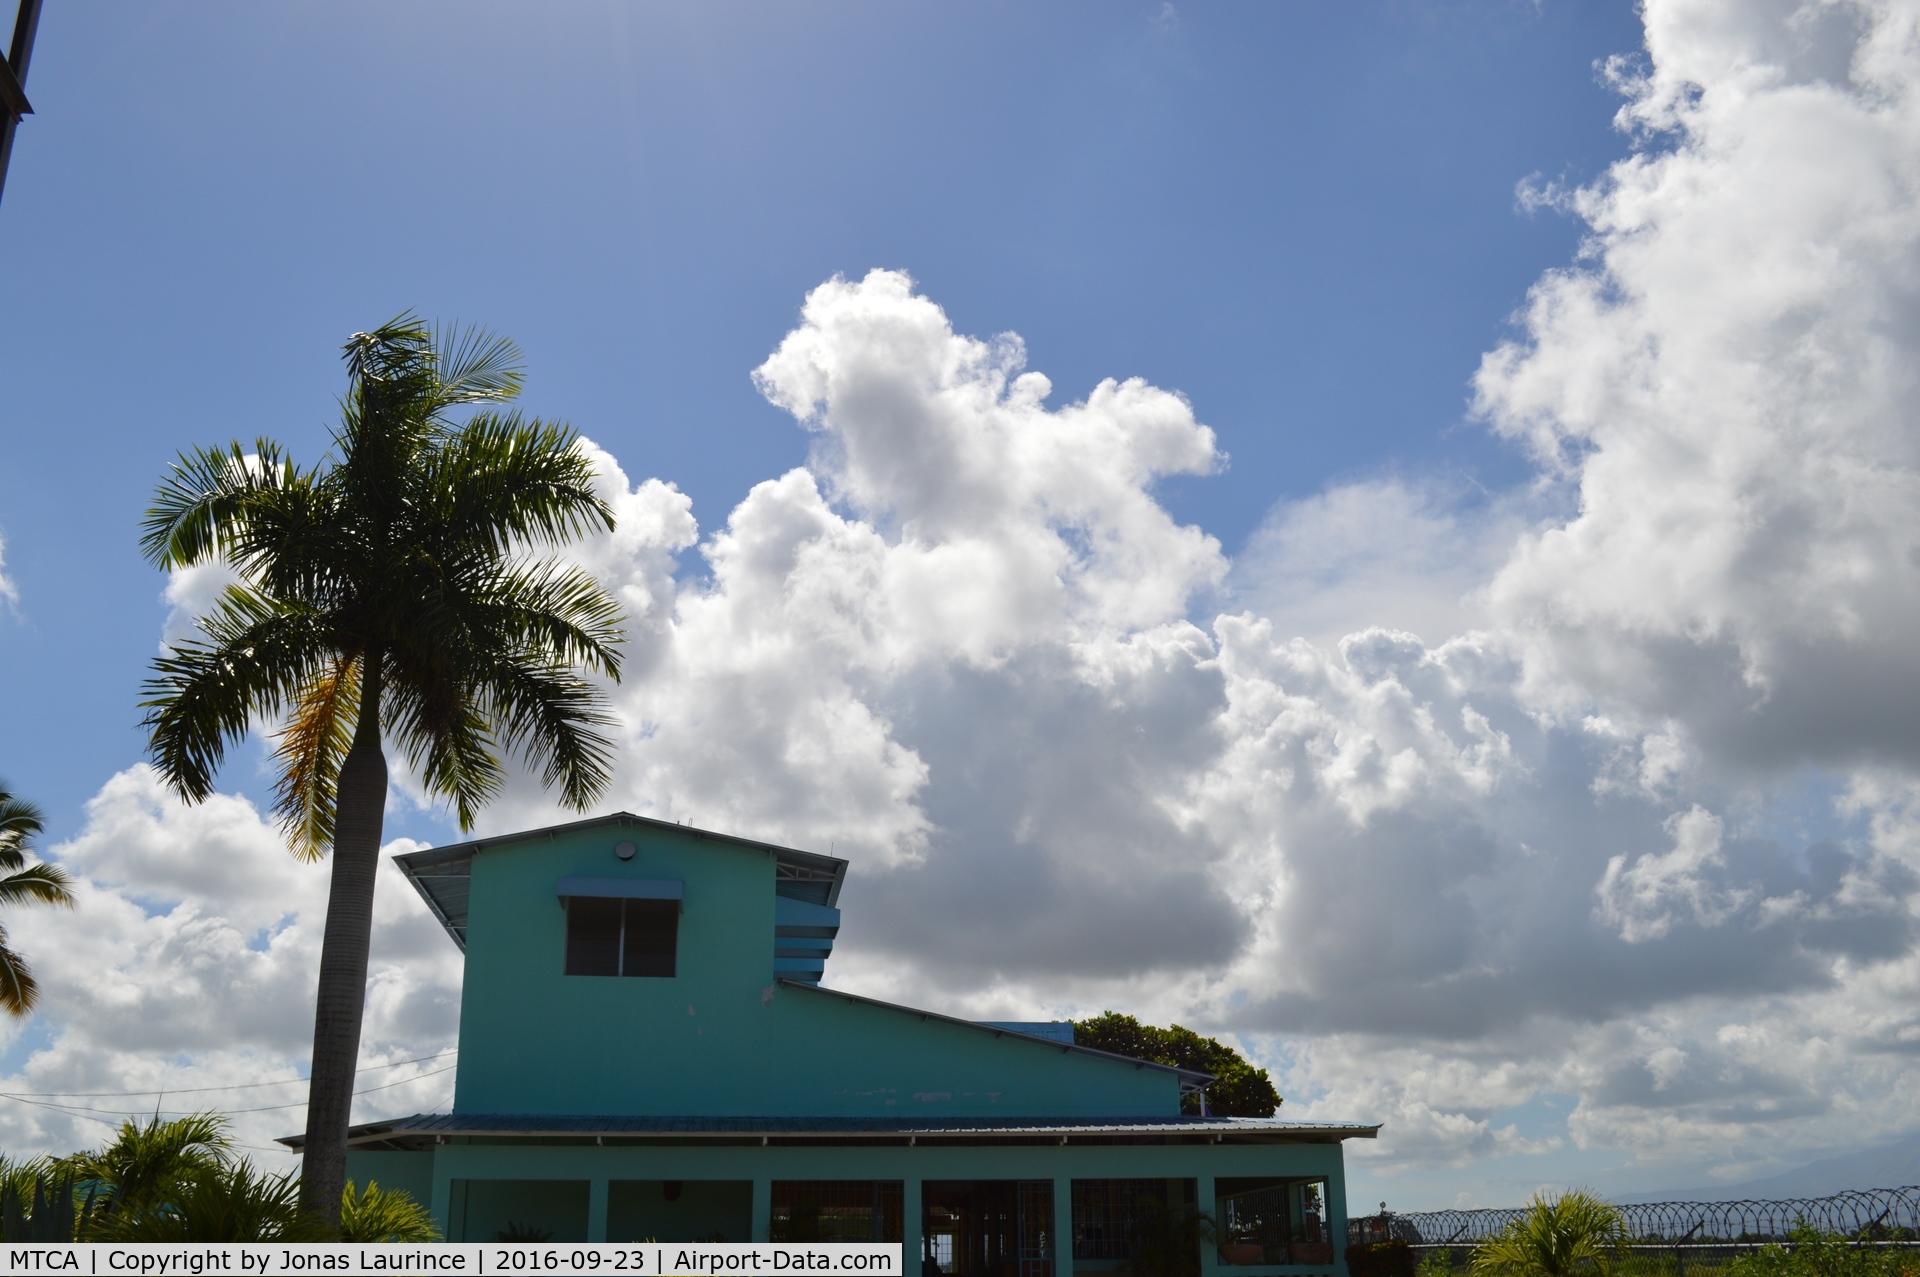 Les Cayes Airport, Les Cayes Haiti (MTCA) - The main building of the Airport of Les Cayes with the Palm Tree !!!